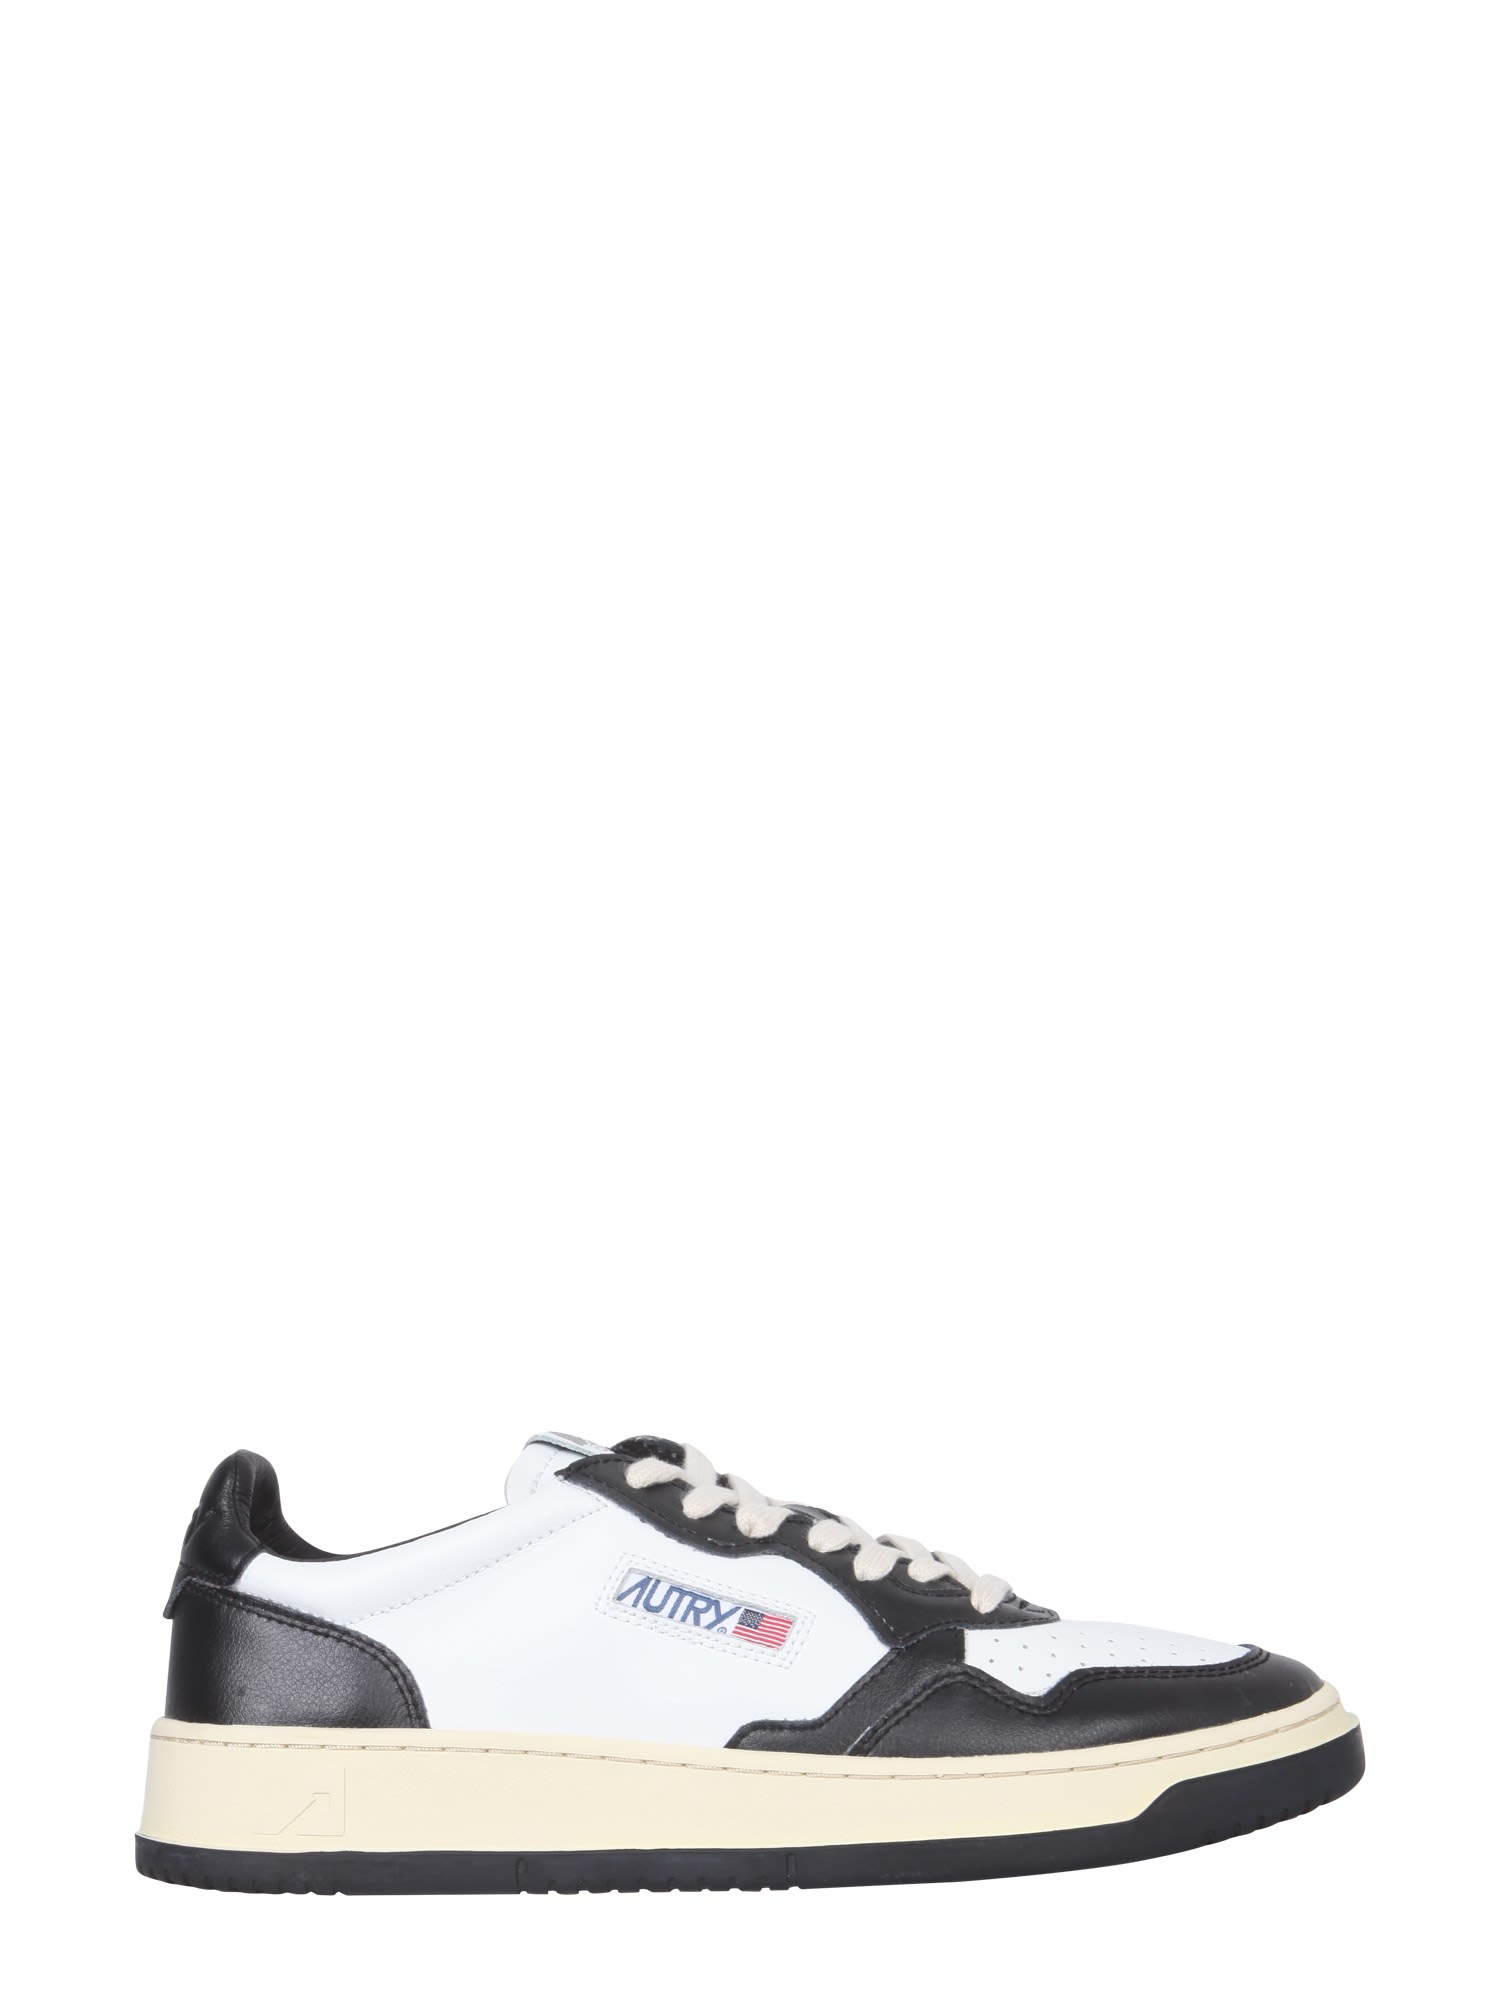 Shop Autry Leather Sneakers In White Black